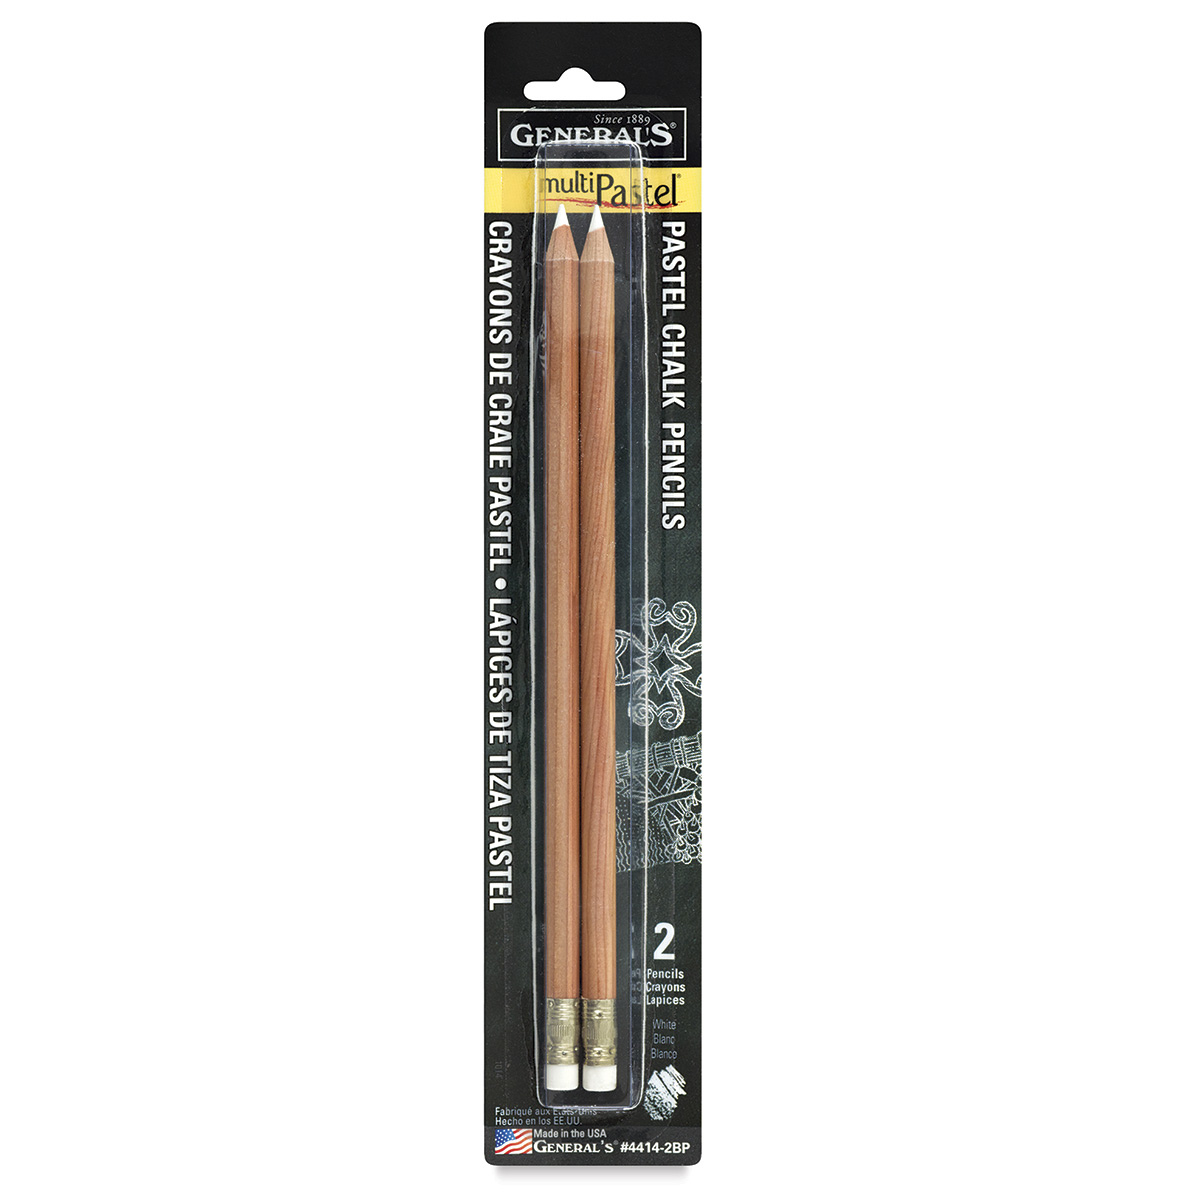  GENERAL PENCIL Assorted Colors MultiPastel (R) Chalk Pencils  Pkg, 36 Count (Pack of 1) : Office Products